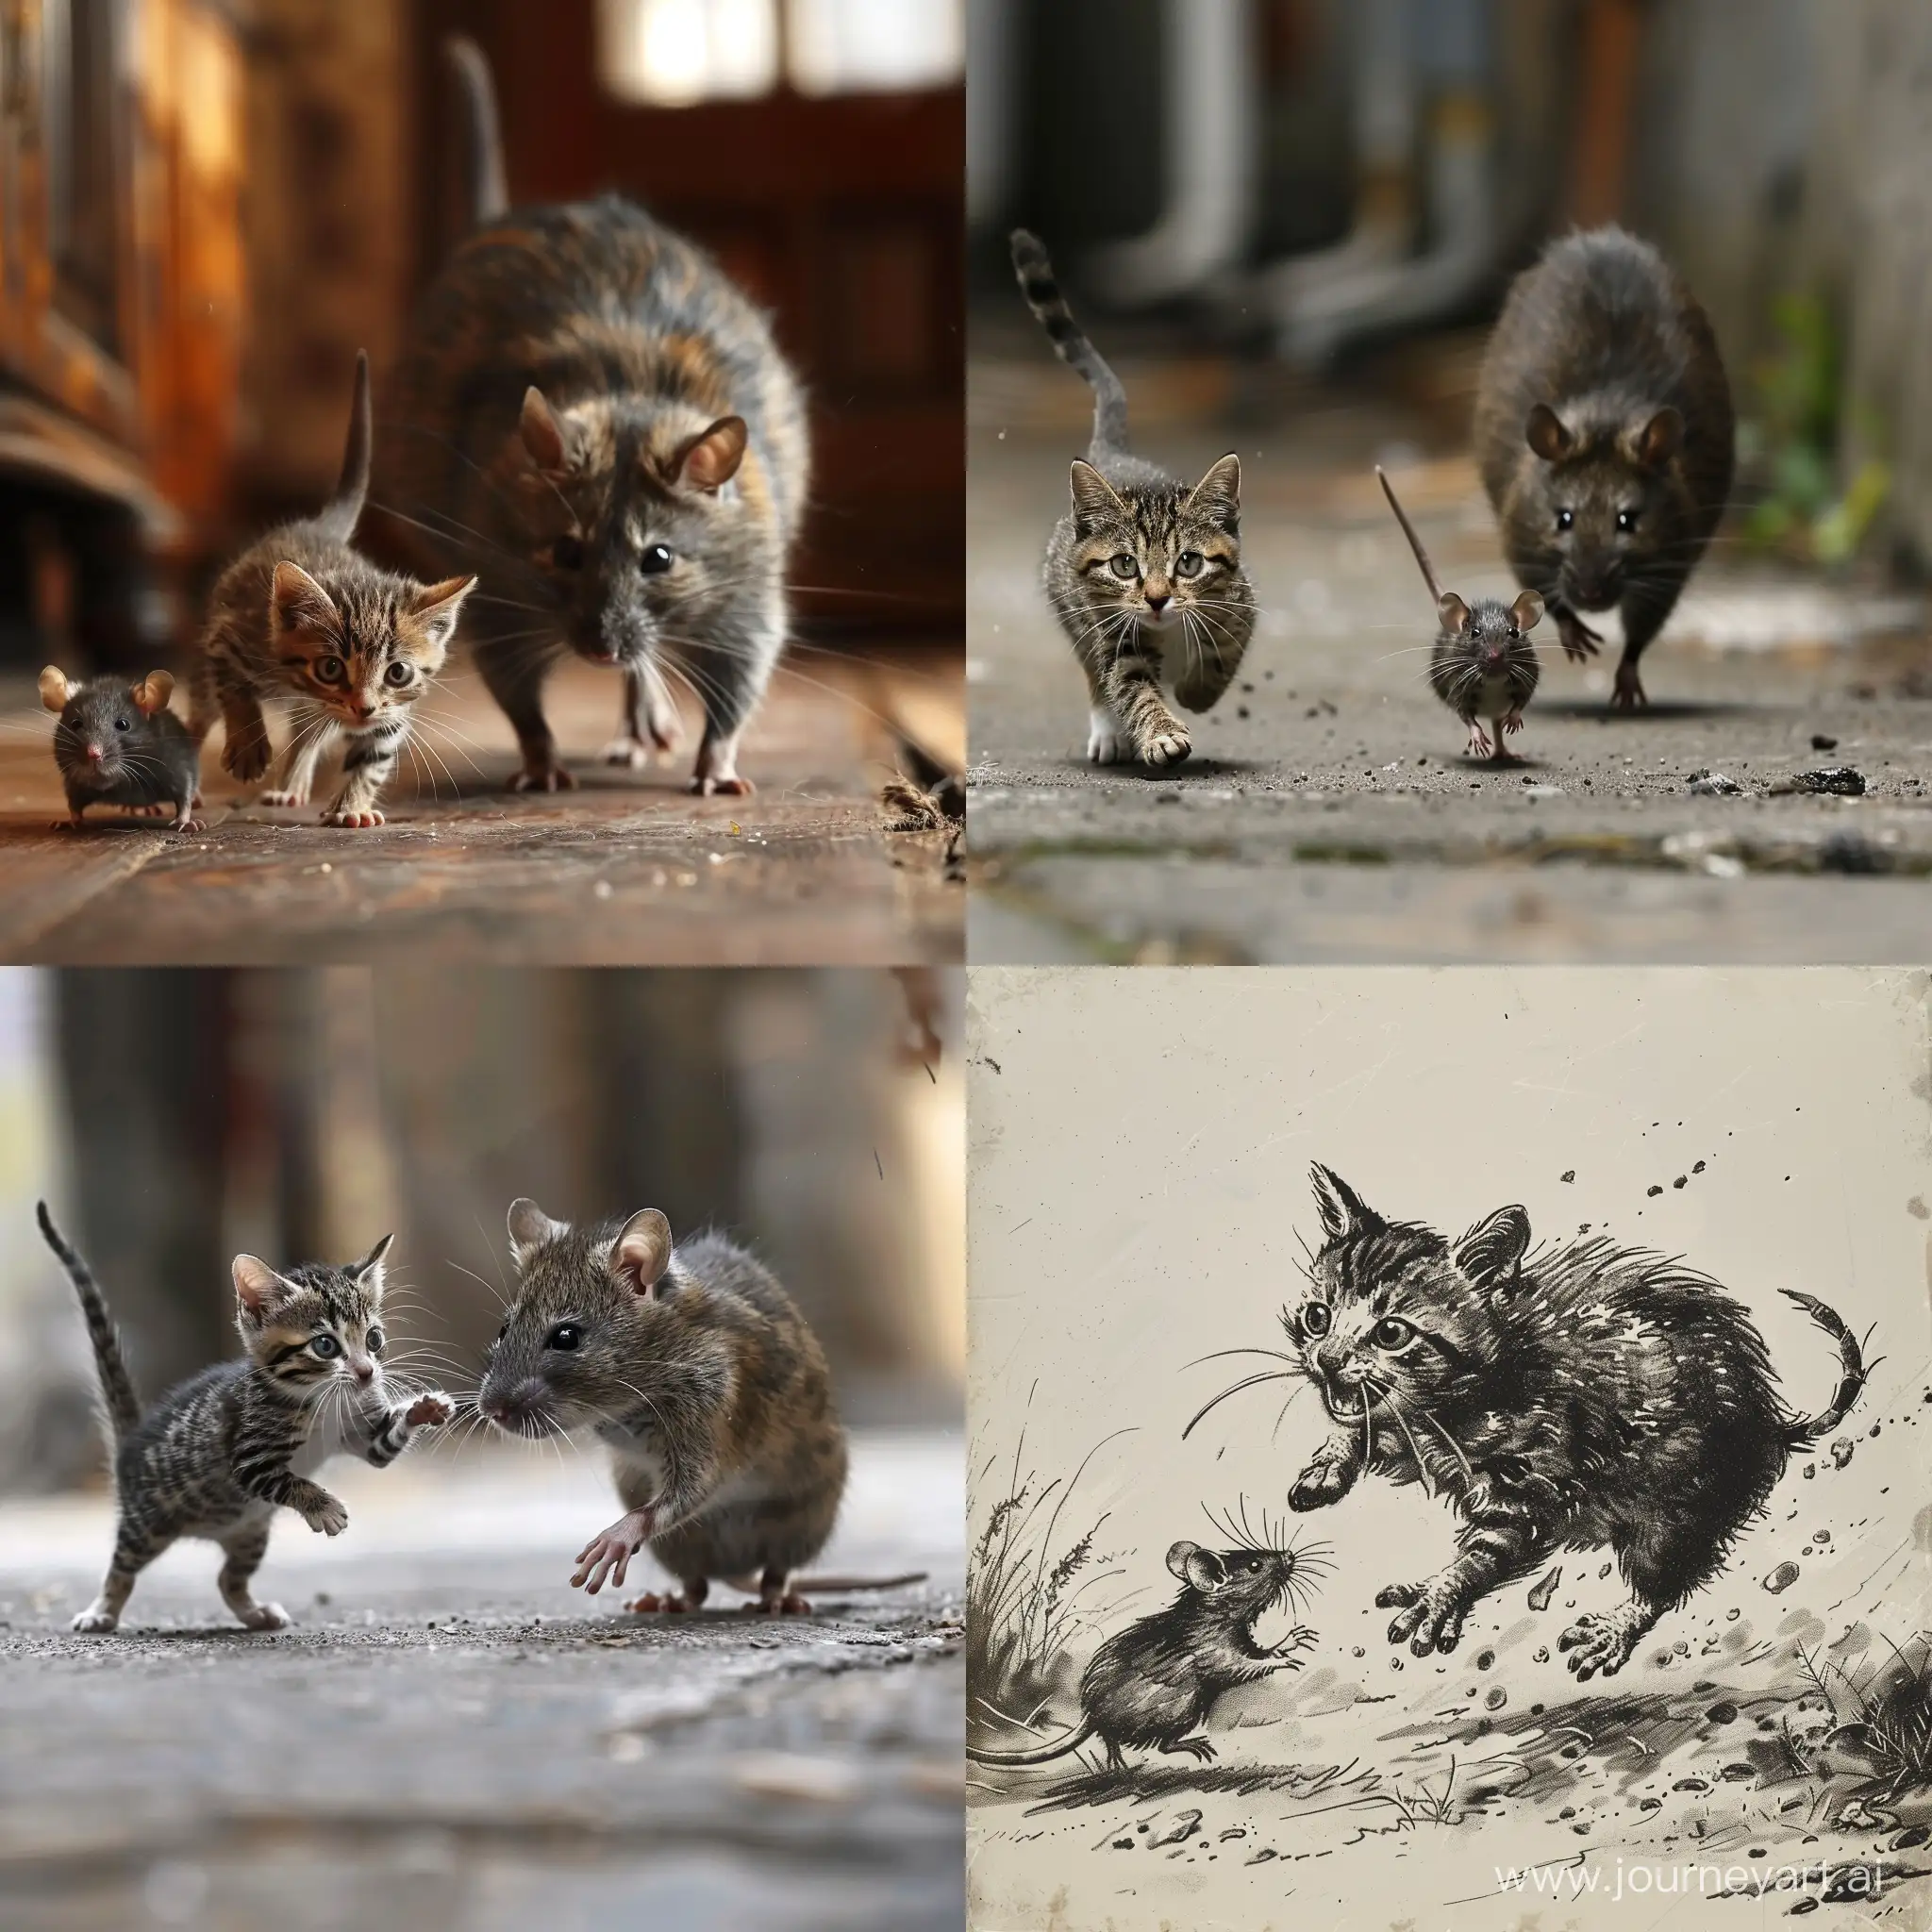 a smaller cat is chased by the bigger rat